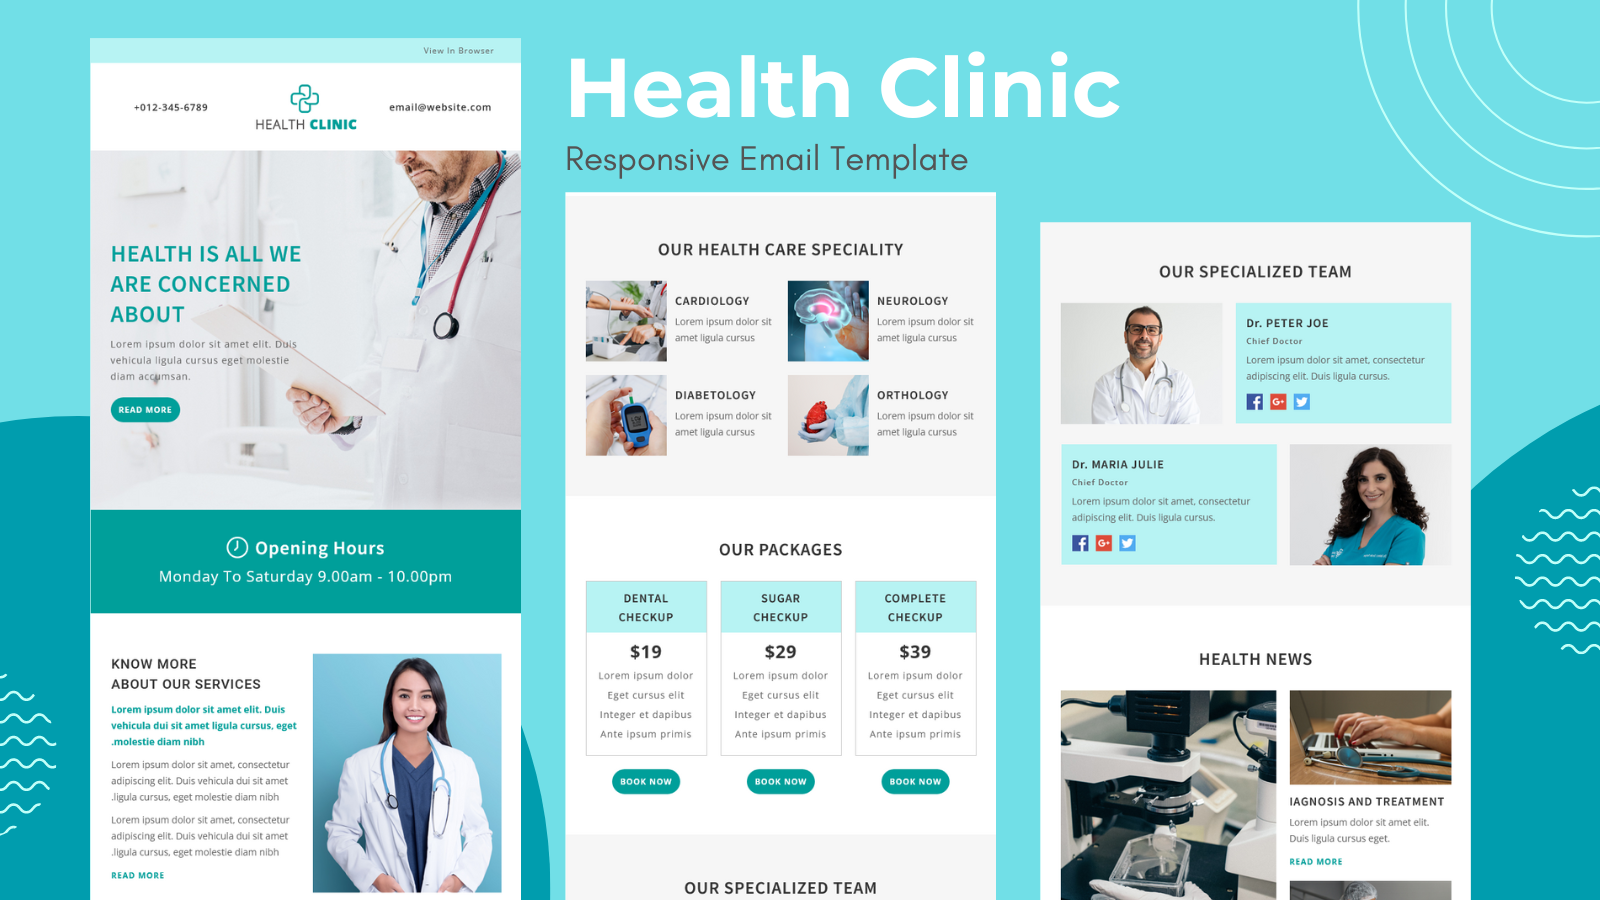 Health Clinic – Responsive Email Template